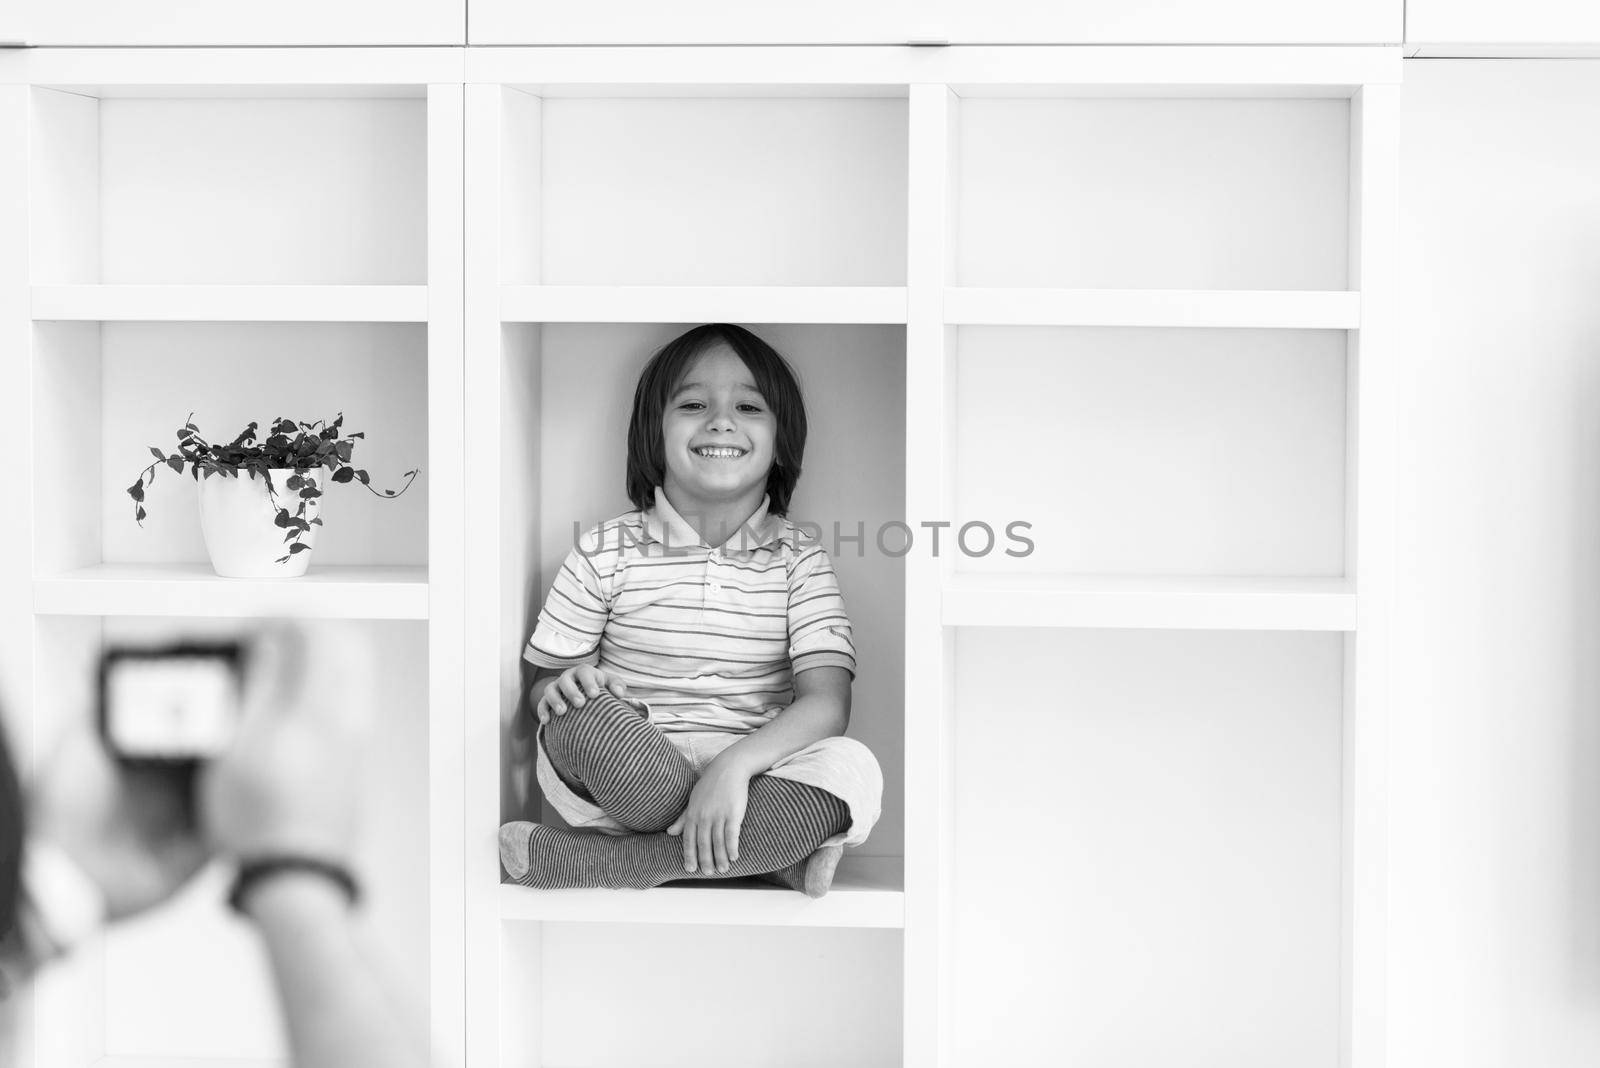 Photoshooting with kid model at studio as new modern home